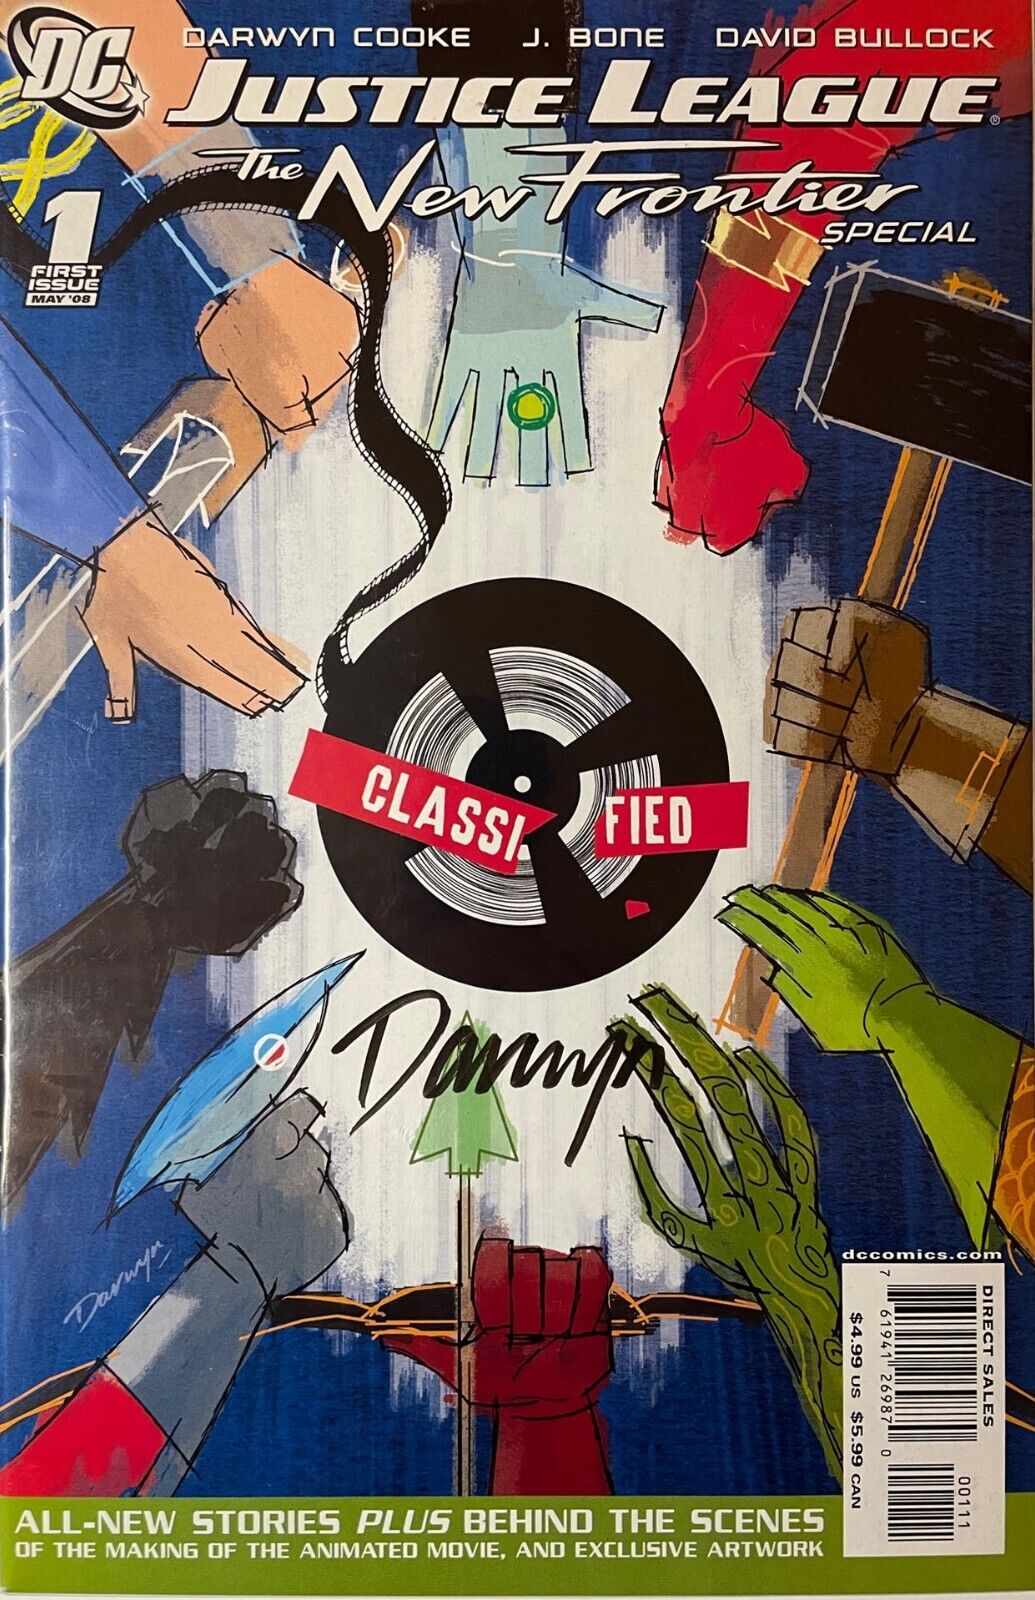 Justice League NEW FRONTIER Special #1 DC - SIGNED / AUTOGRAPHED by DARWYN COOKE